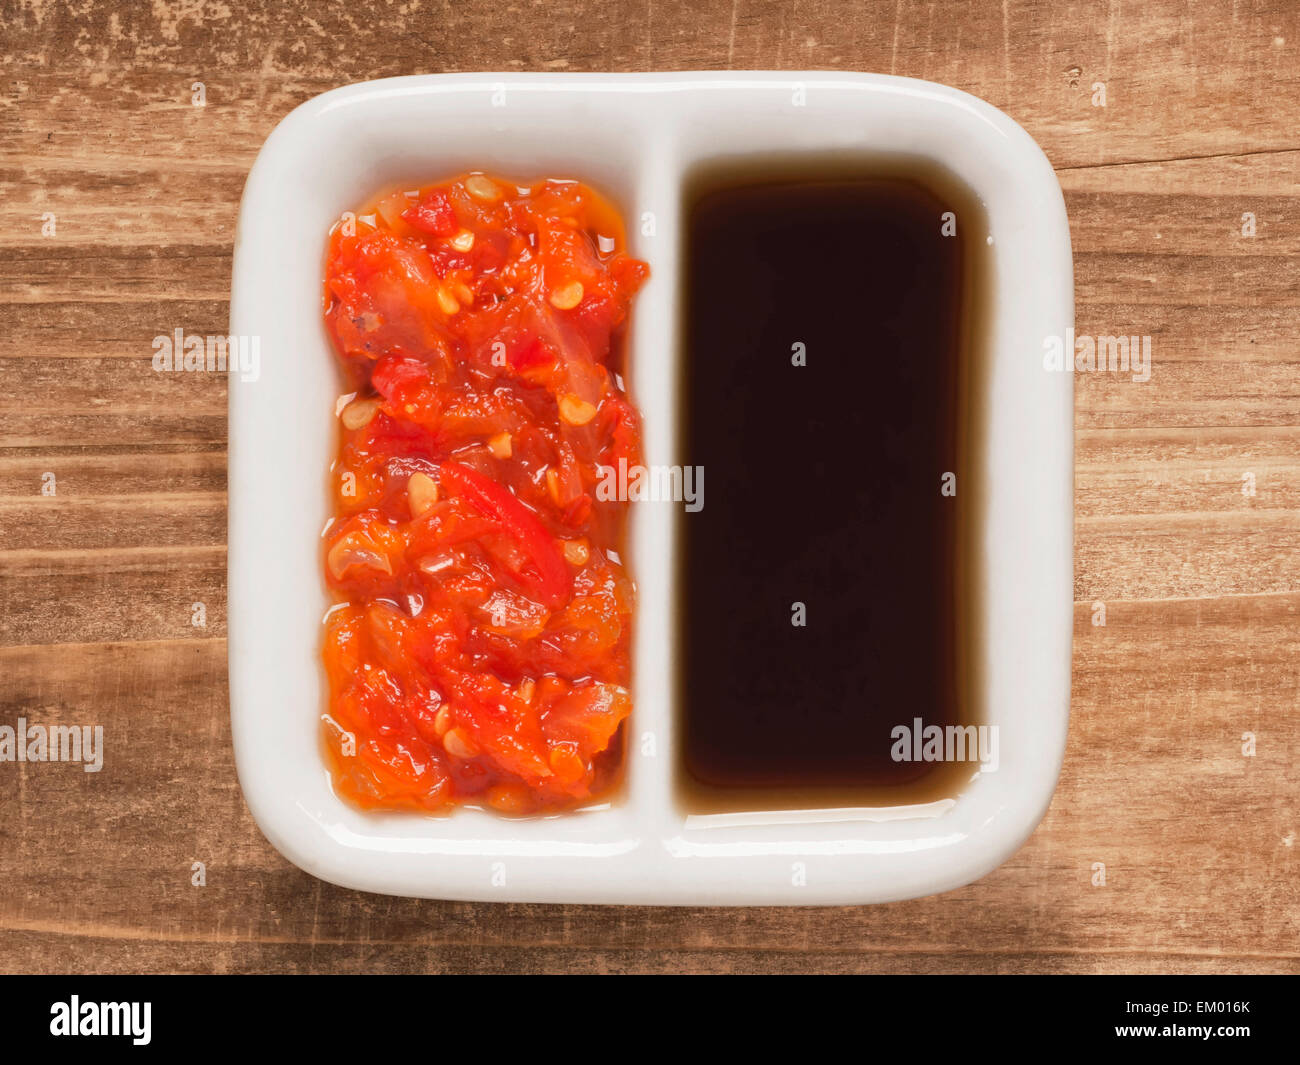 red chili and soy sauce Stock Photo